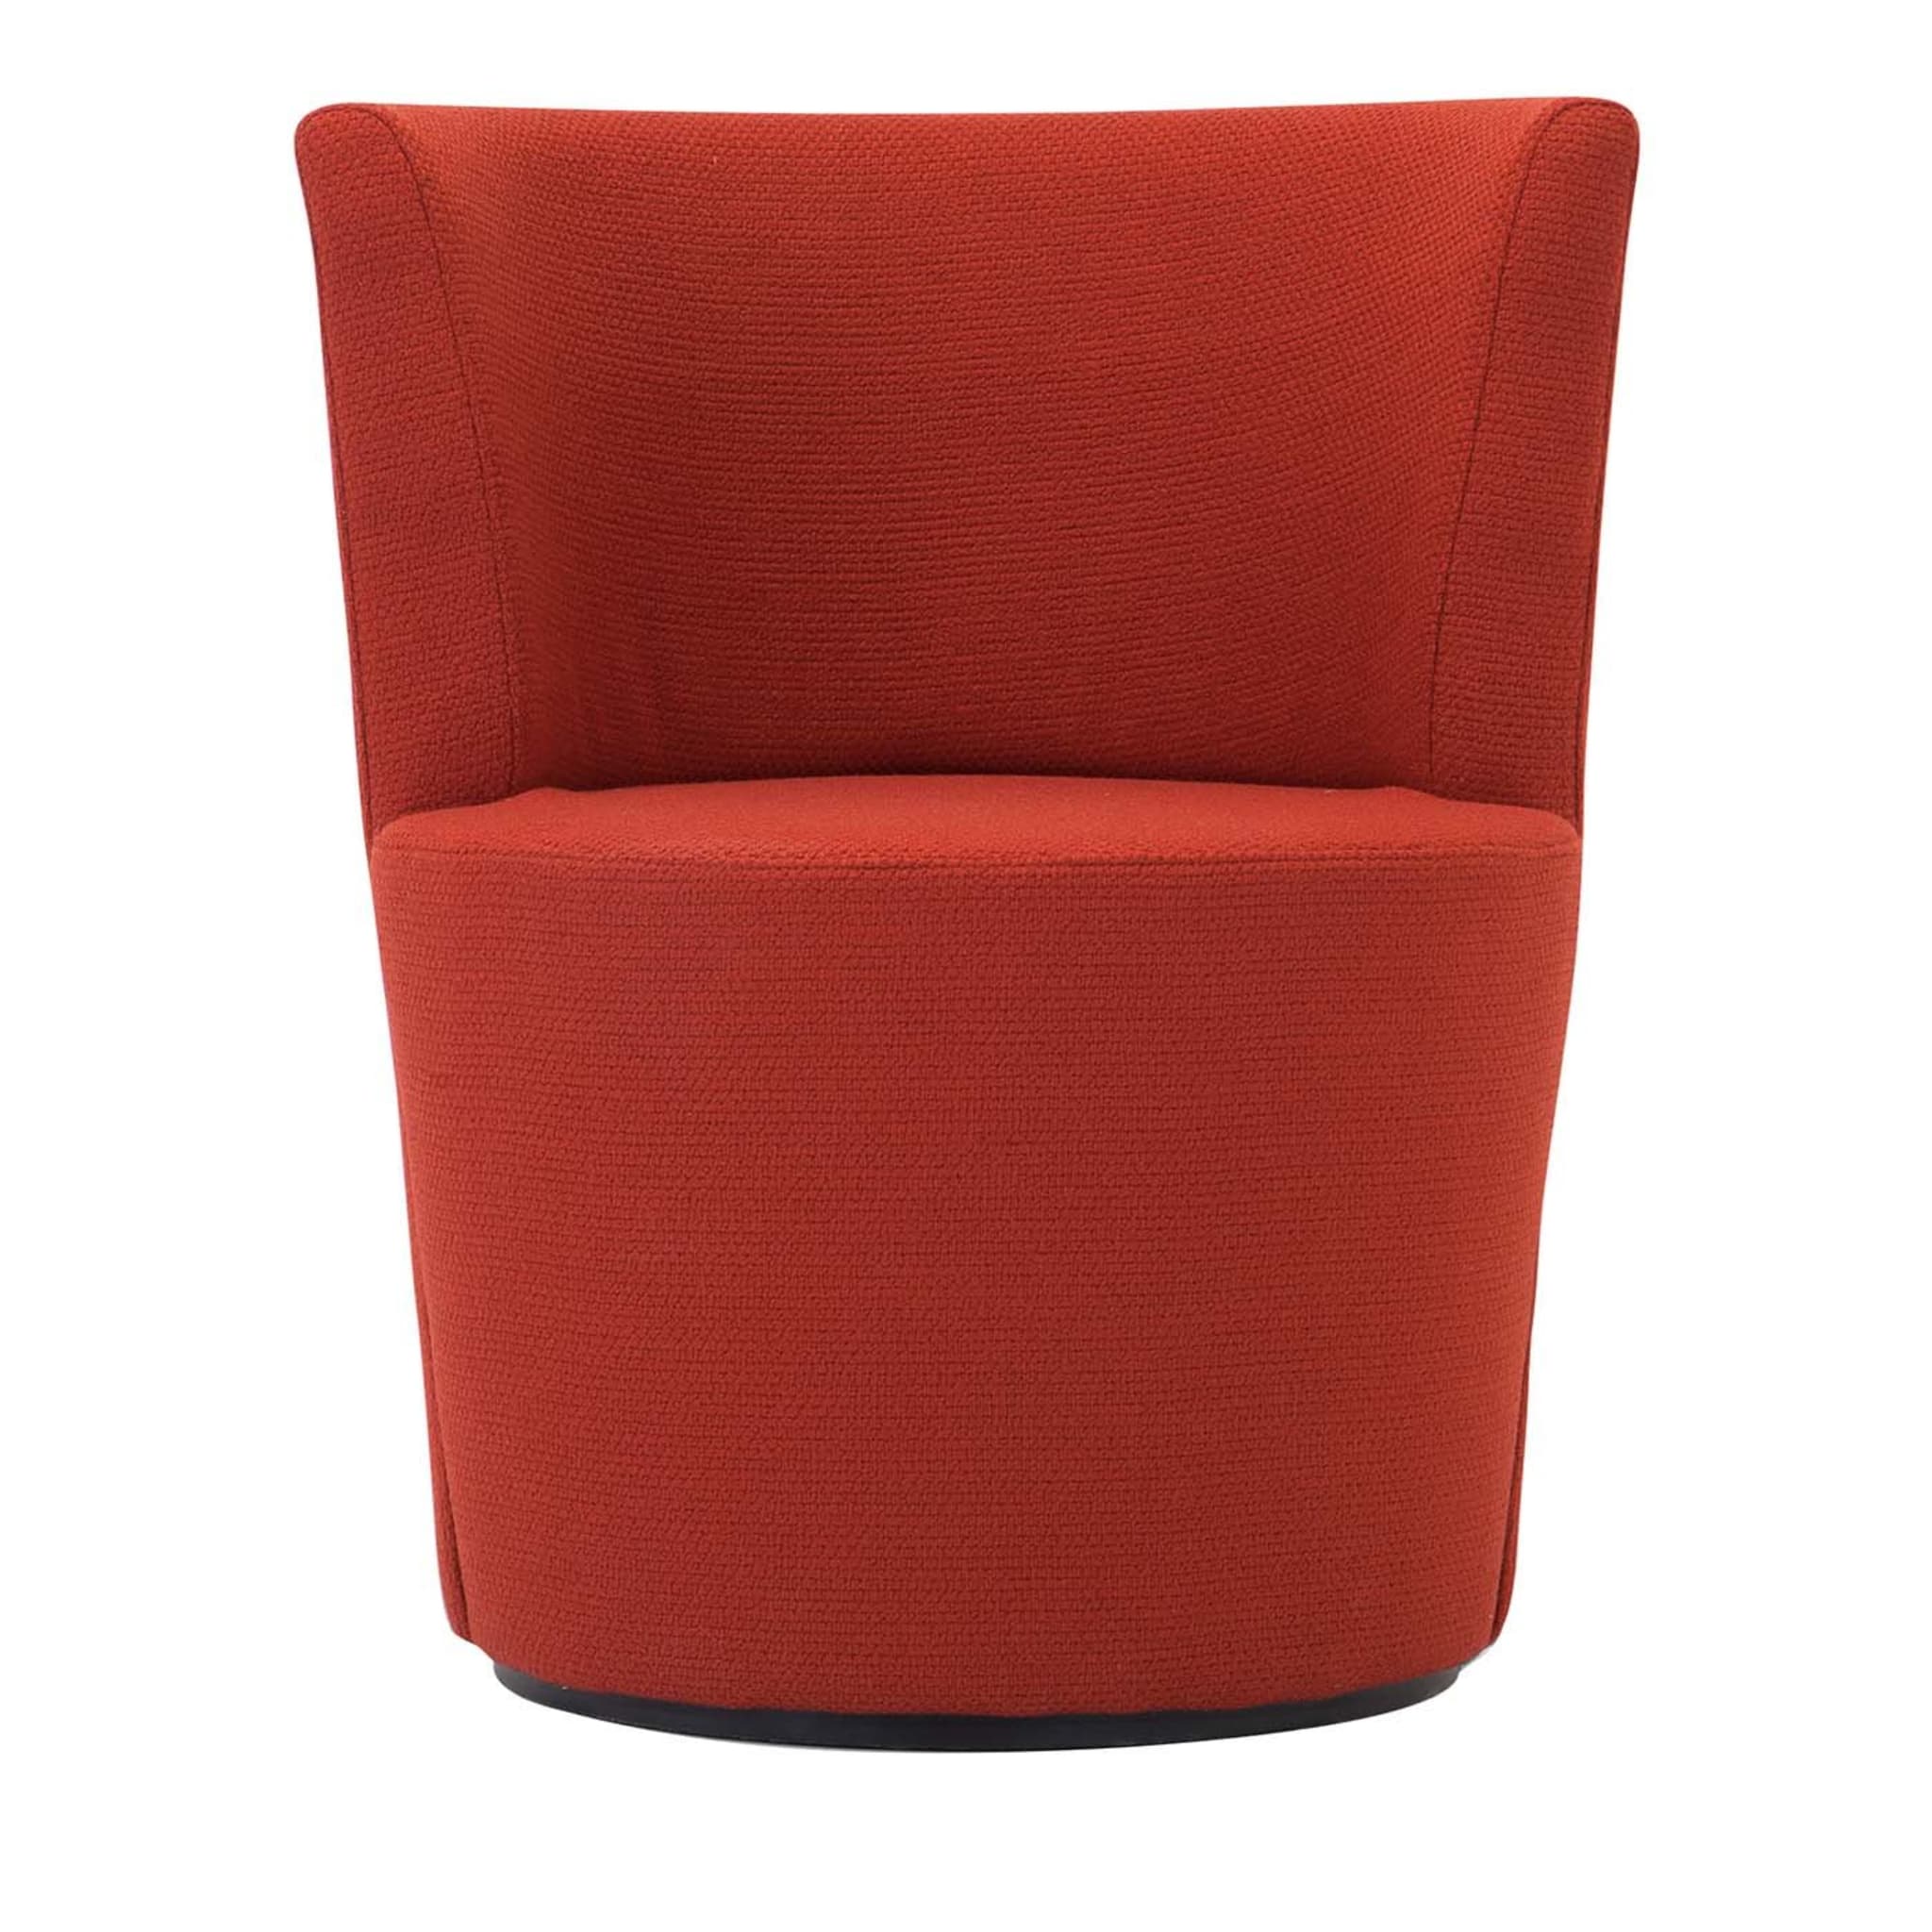 Ronda Red Armchair - Main view